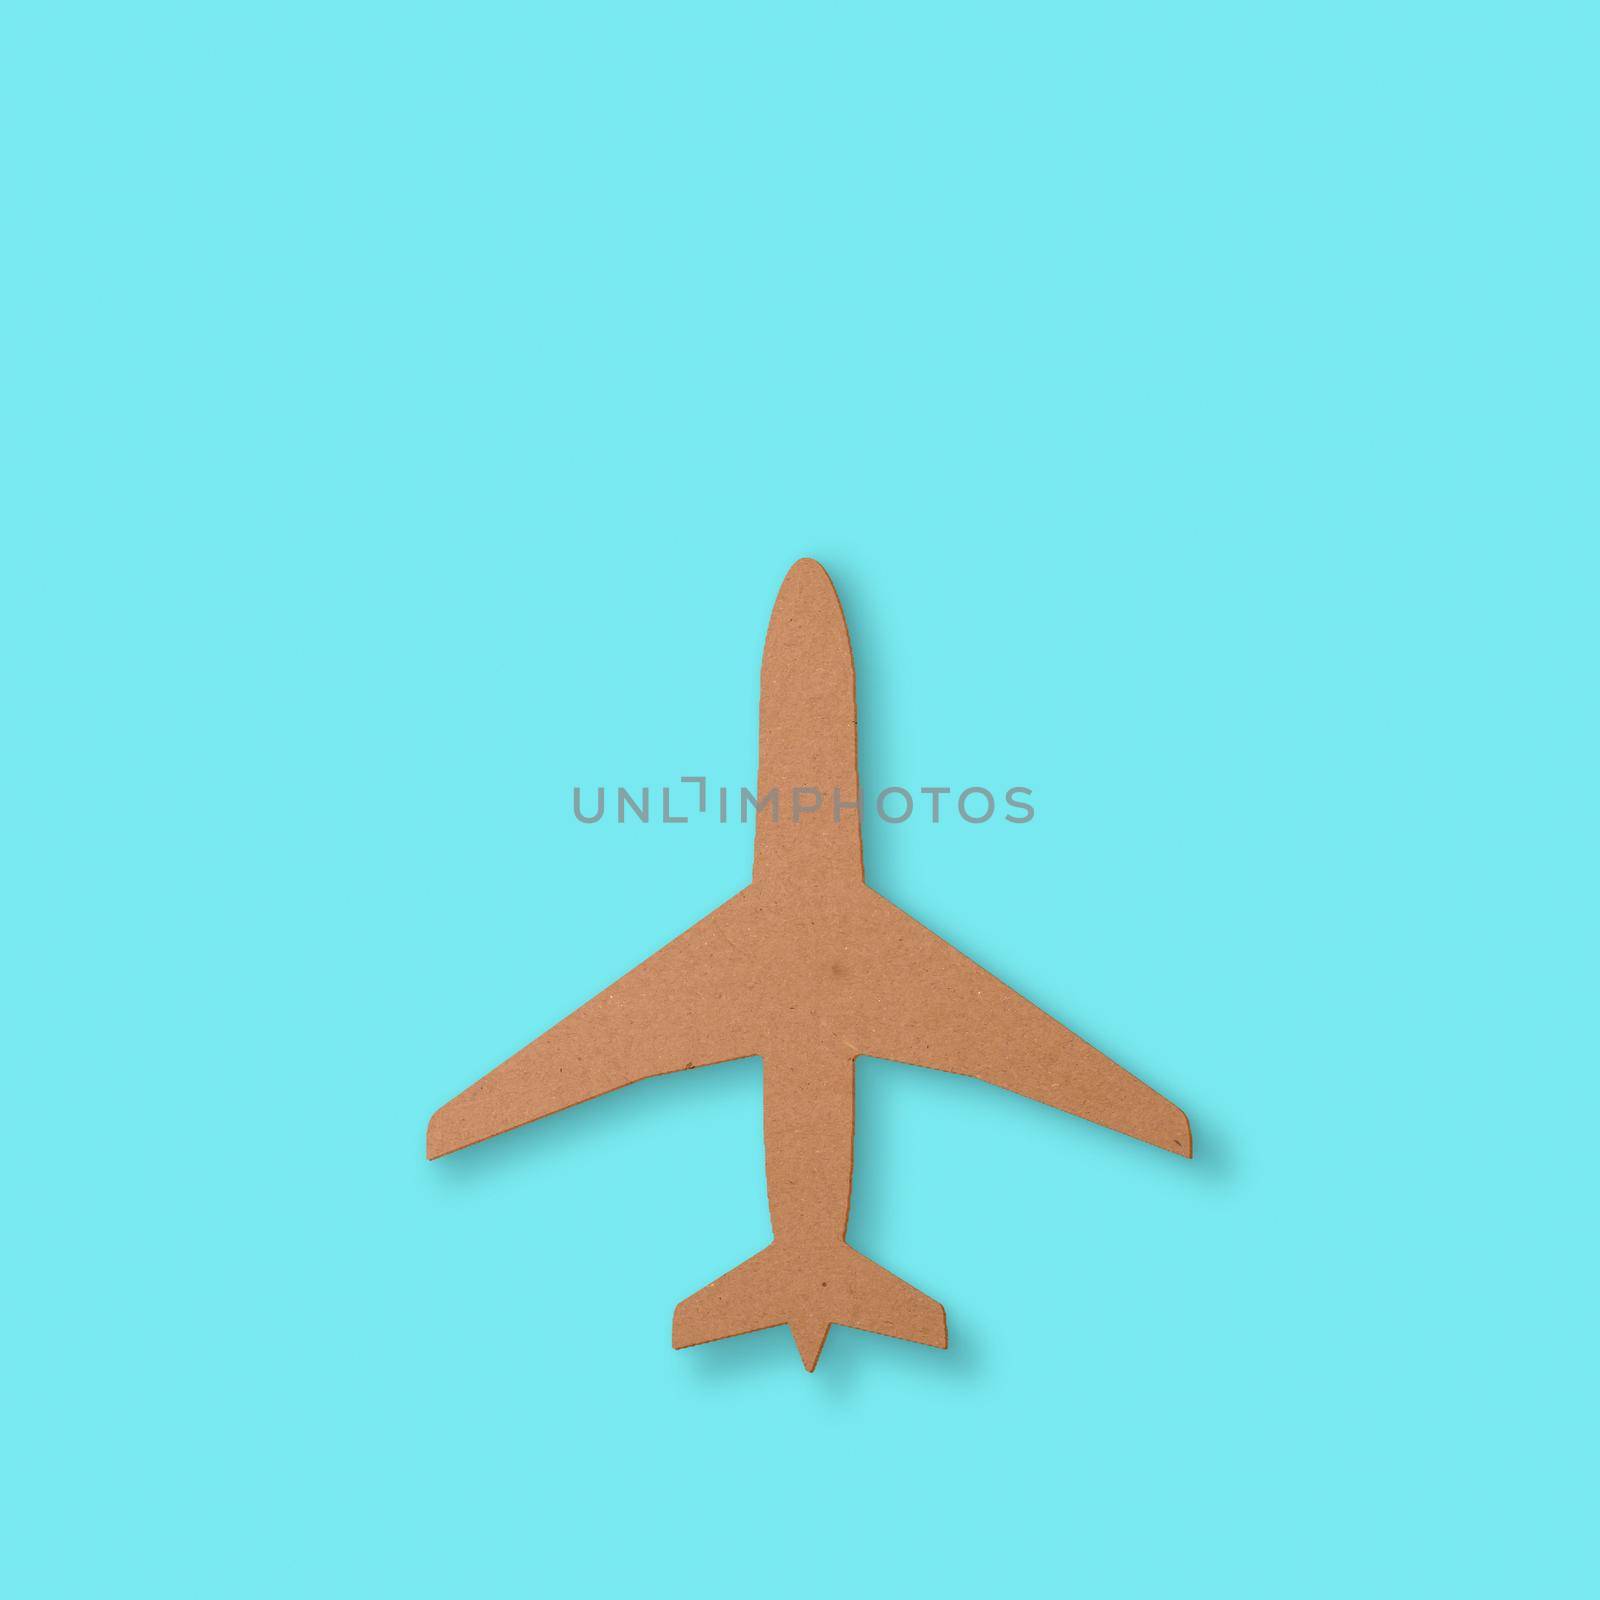 Cutout of an airplane over a blue background with copy space for travel themes